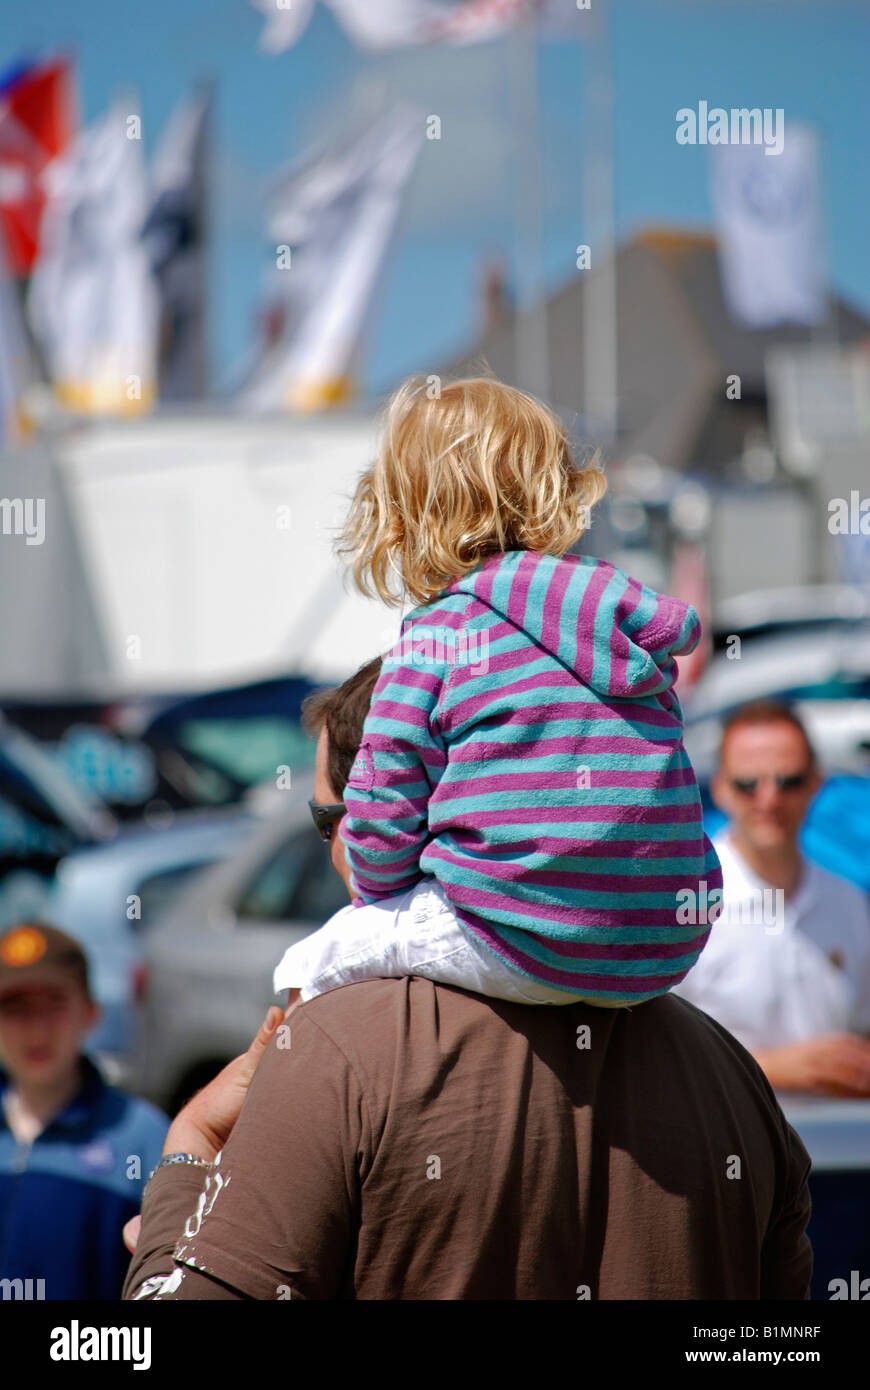 a small child on fathers shoulders Stock Photo